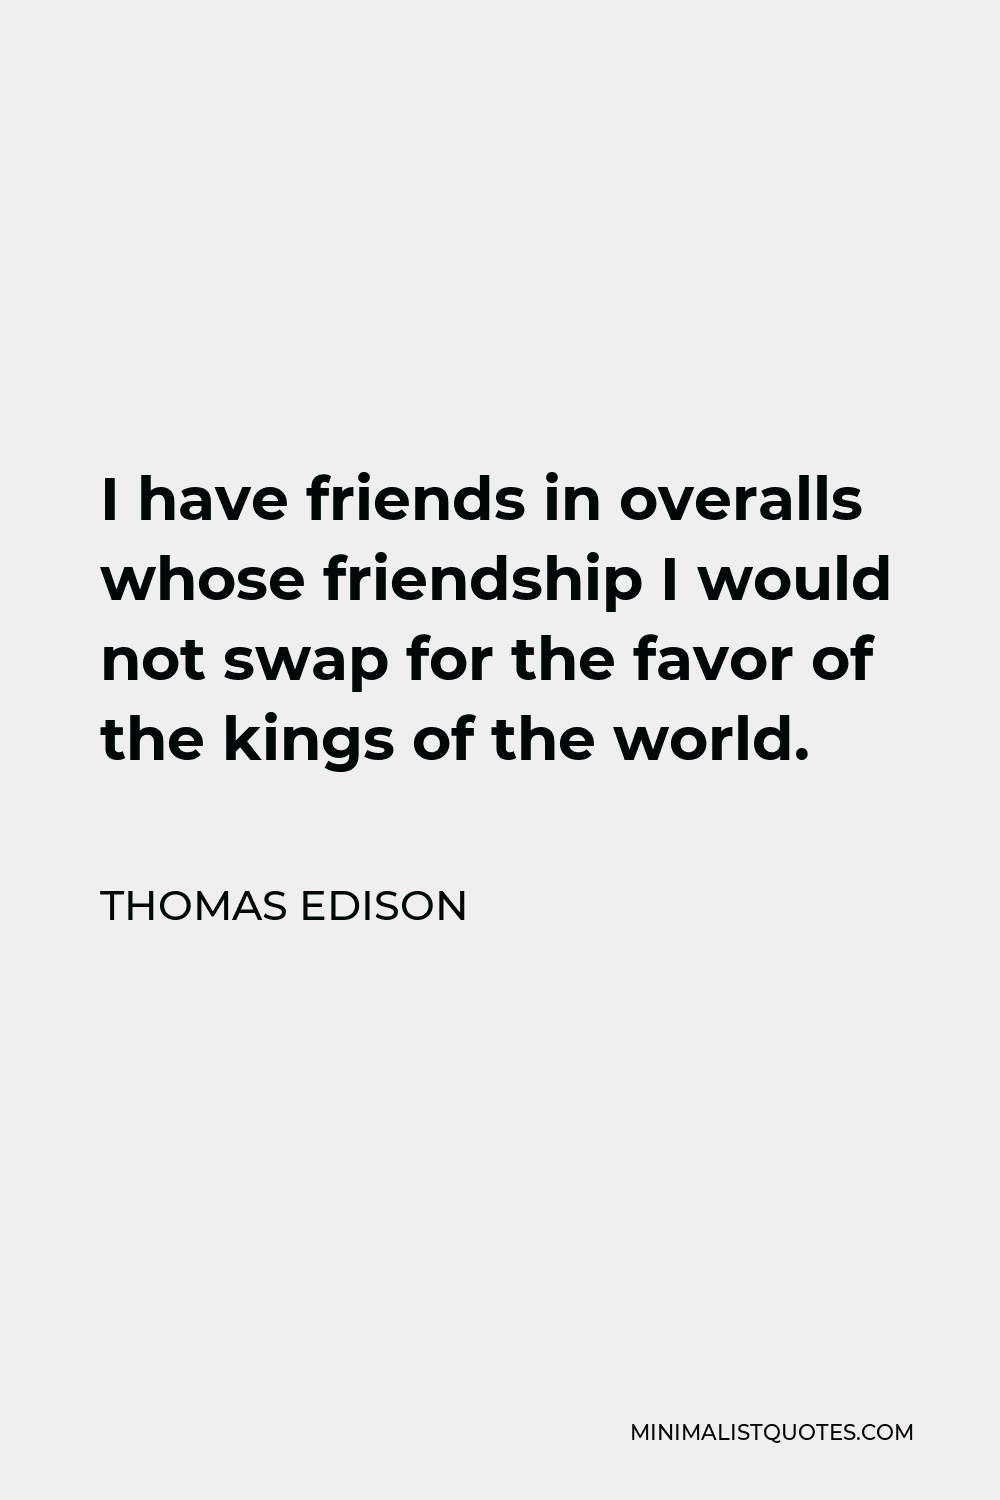 Thomas Edison Quote - I have friends in overalls whose friendship I would not swap for the favor of the kings of the world.